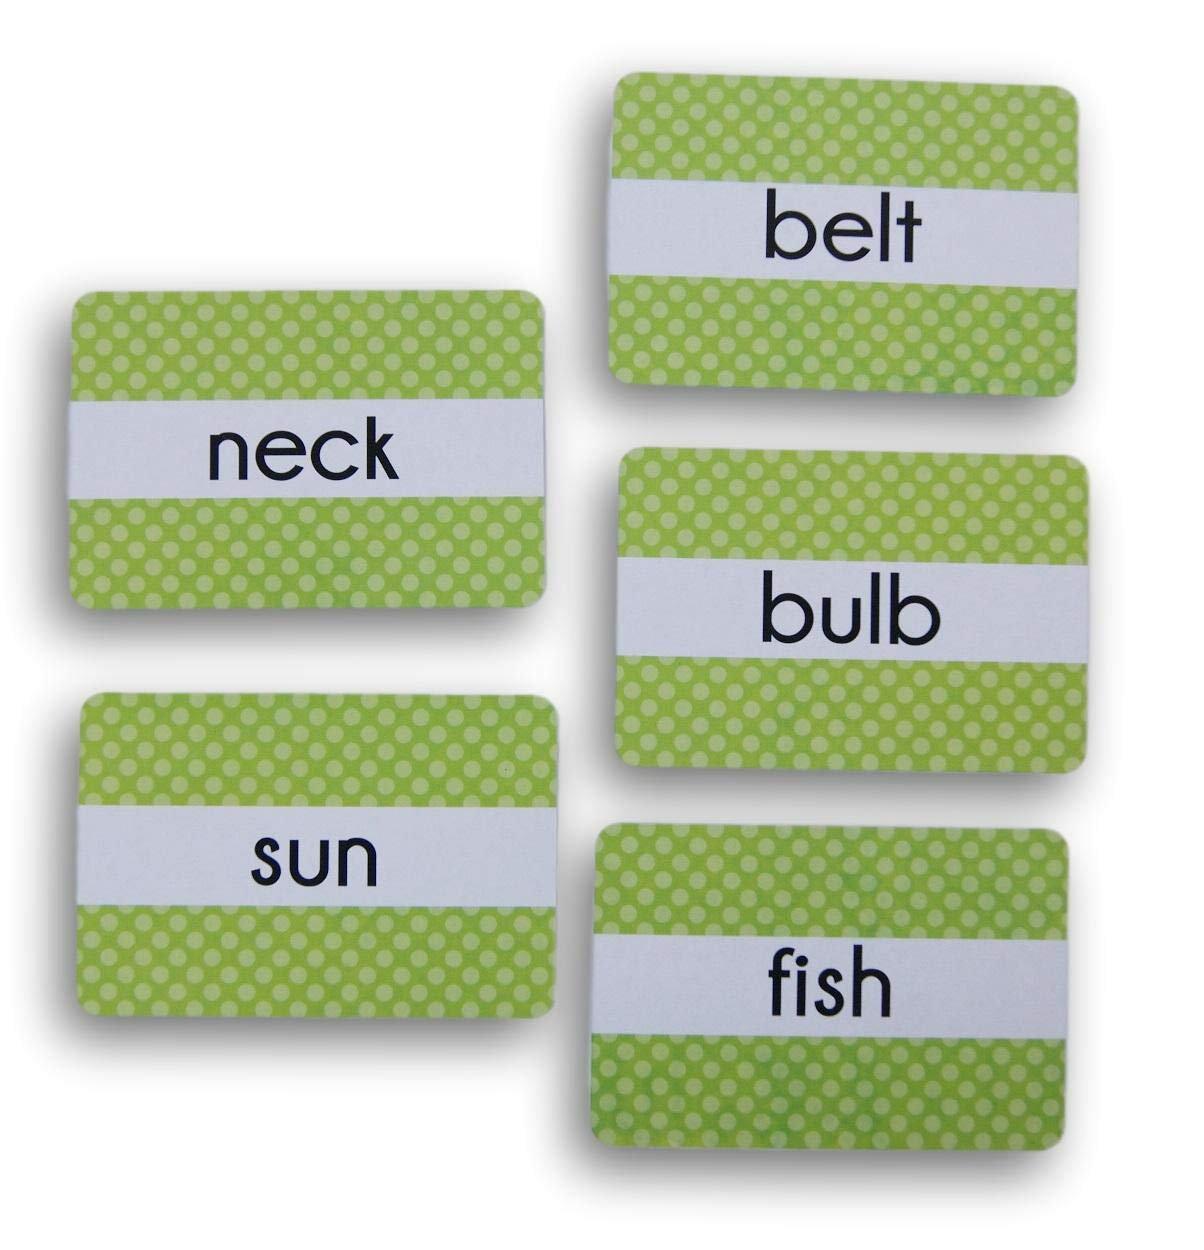 Apple House Missing Vowel Activity Flash Cards with Vowel Stickers, Activity Cards